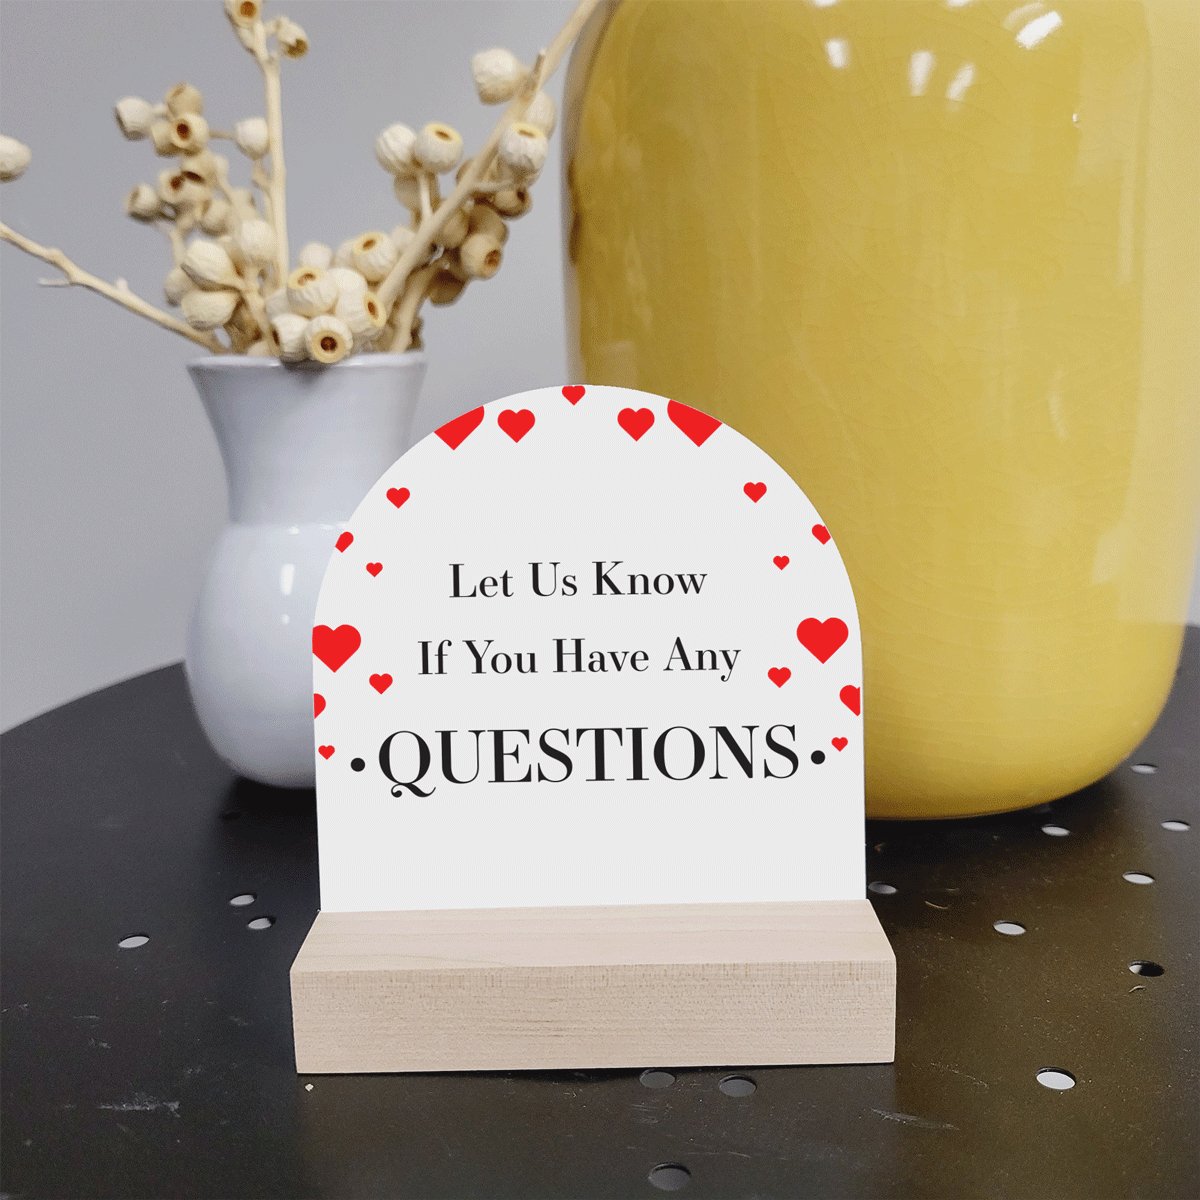 4x4 Arched Sign - Let us know of you have Questions - Valentine - All Things Real Estate